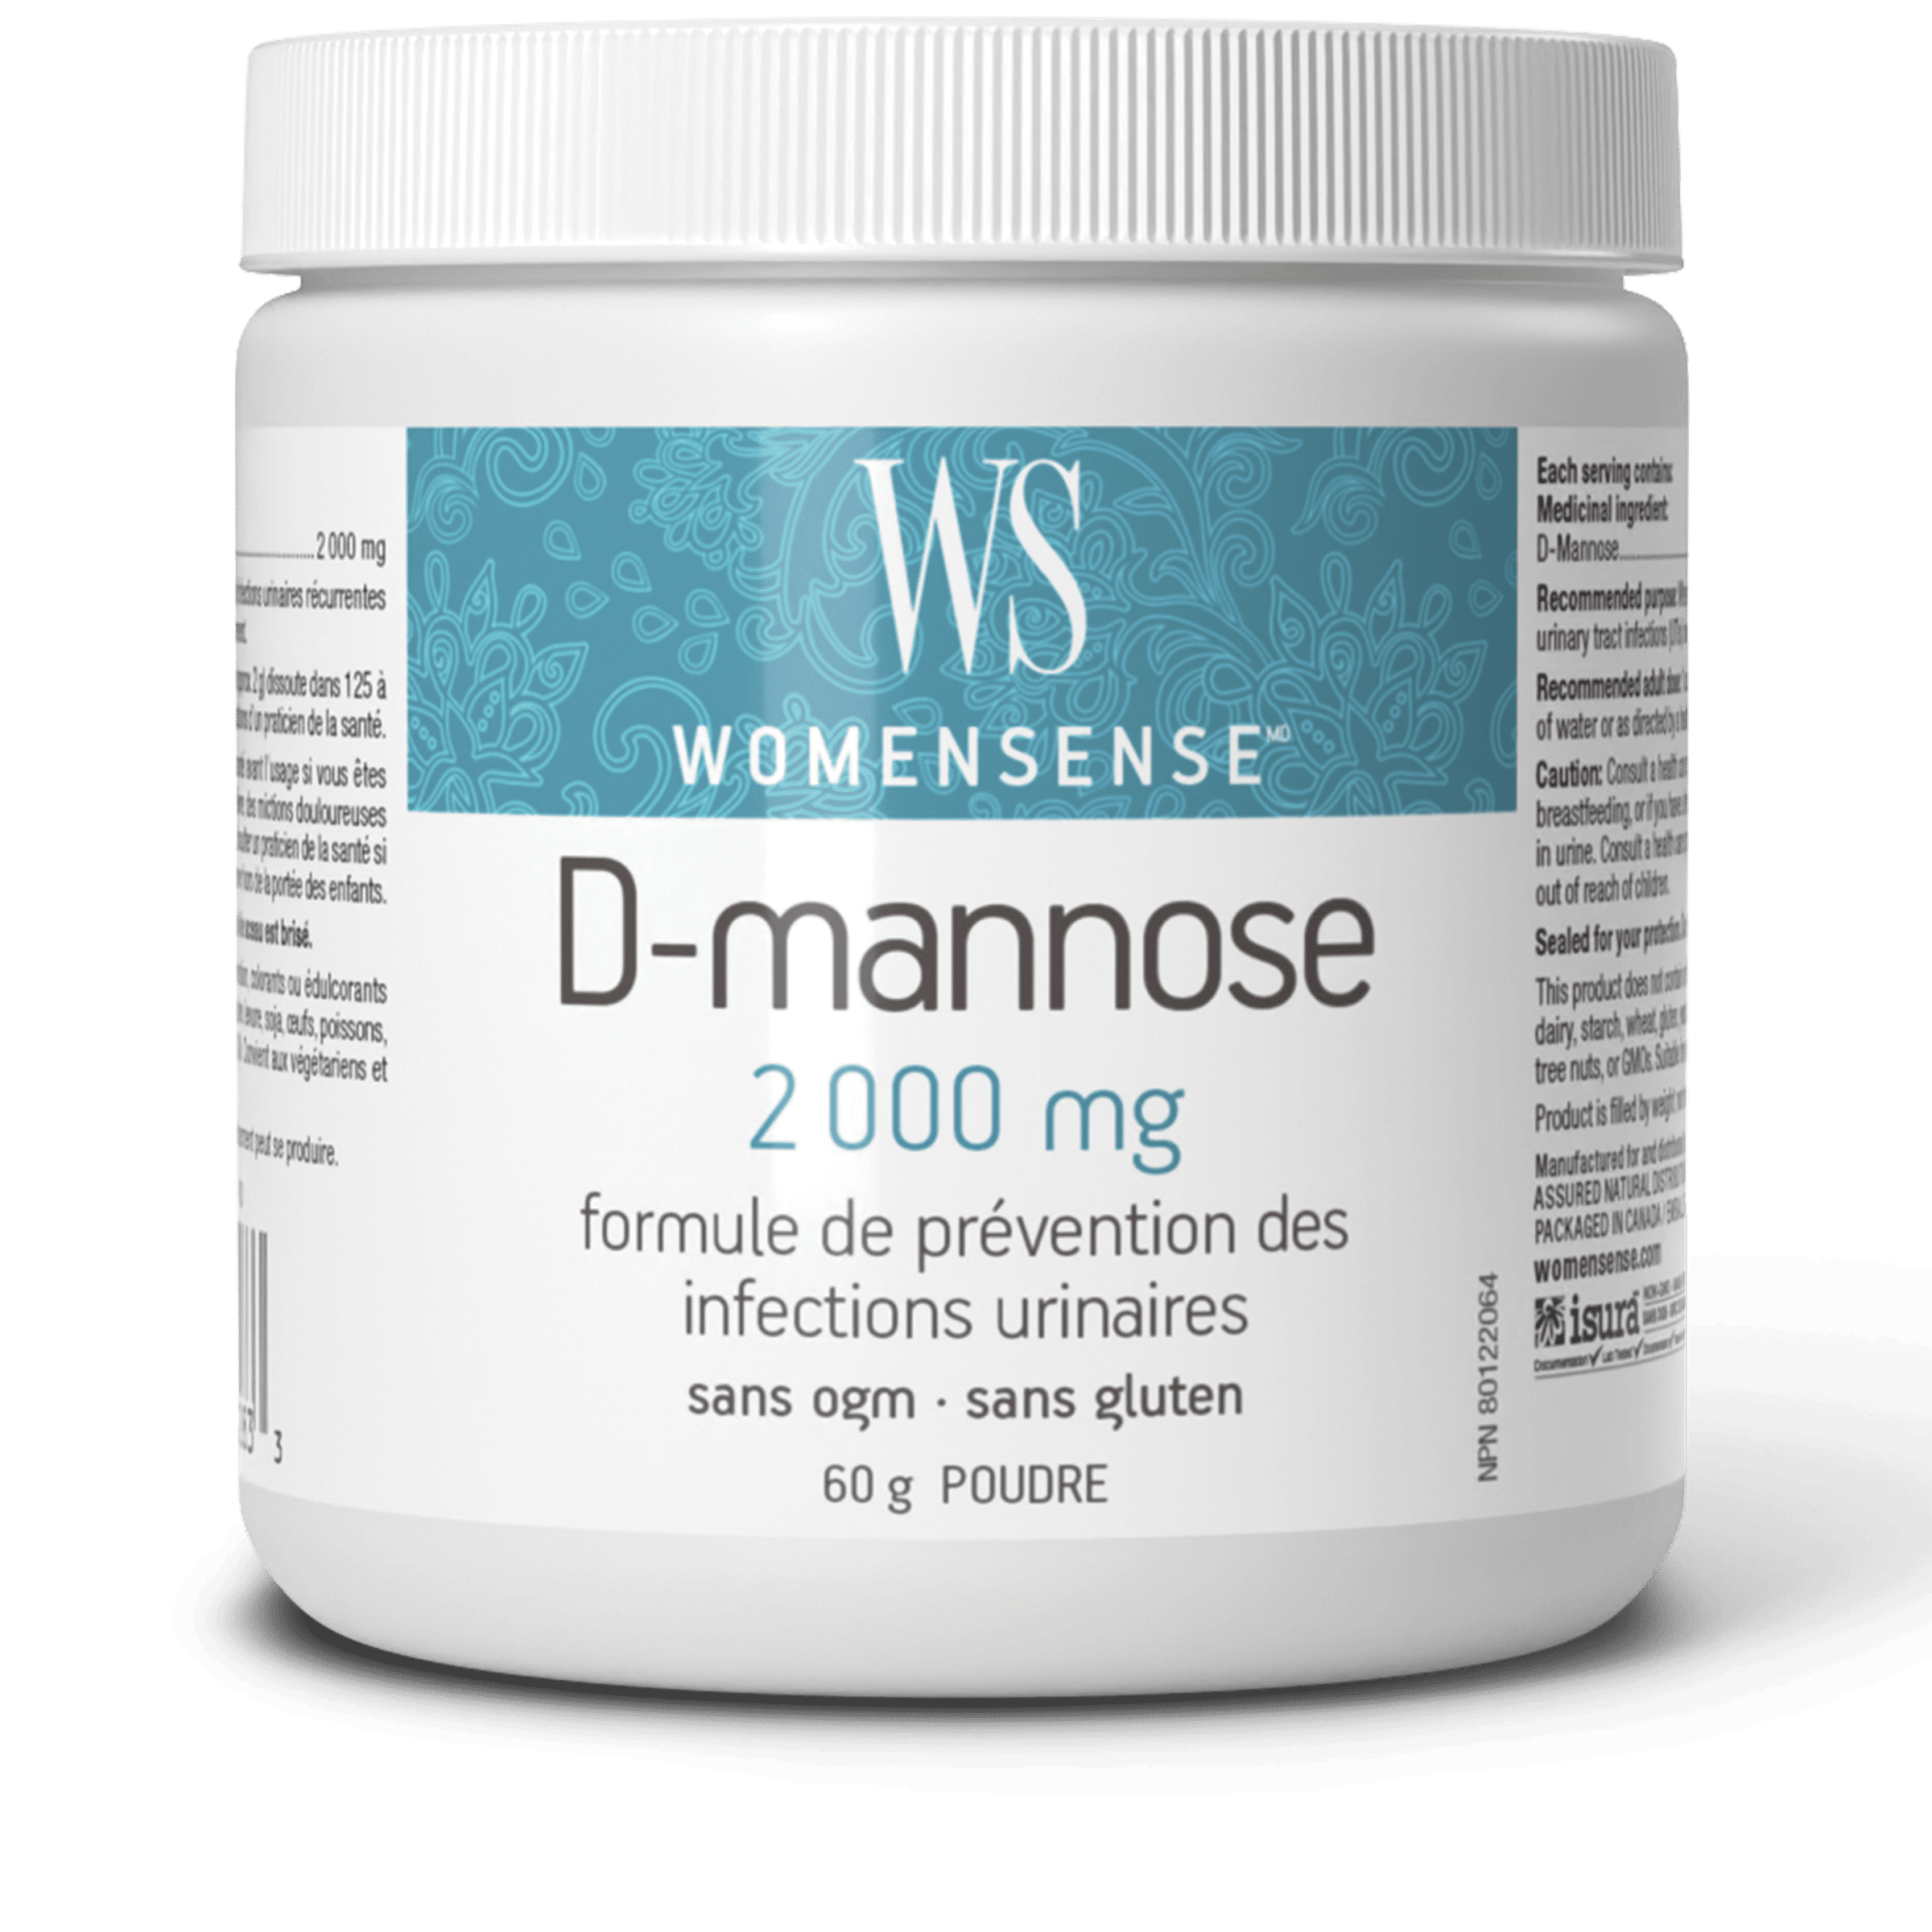 PREFERRED NUTRITION Suppléments D-Mannose 2000mg 60g